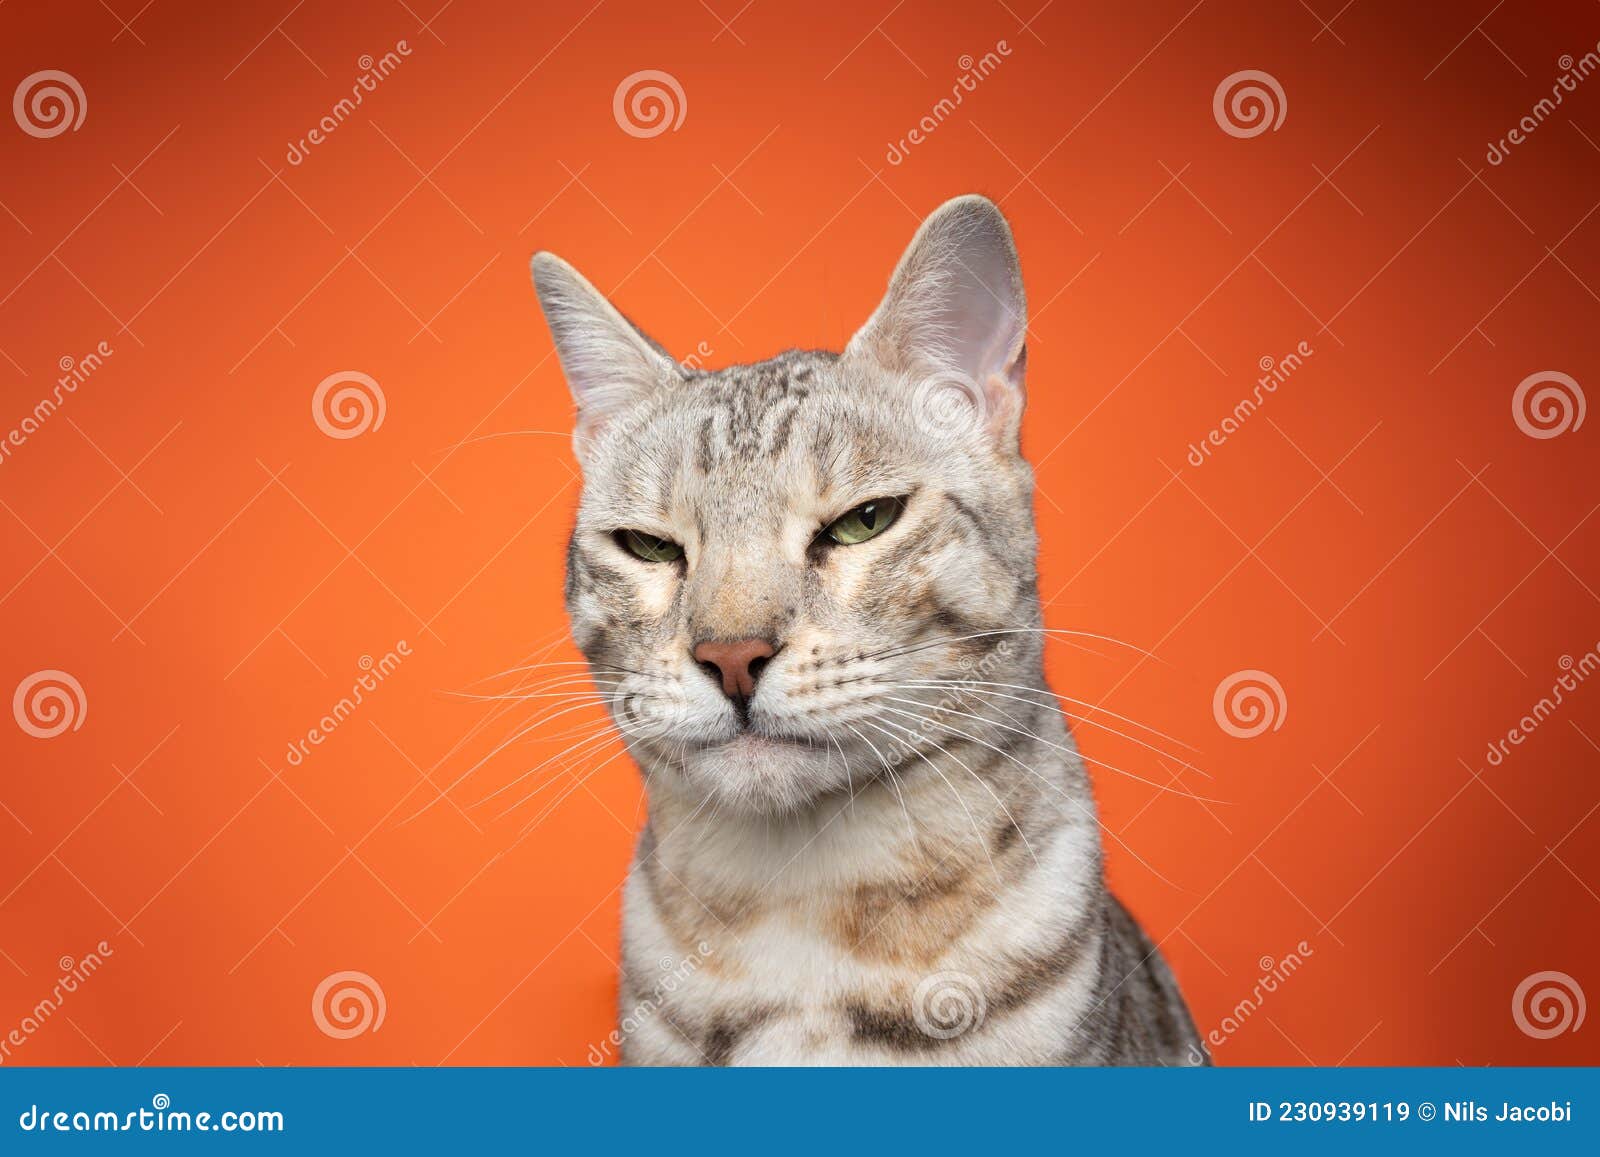 Close Up Face Of Cat. Upset Or Angry Mood Mode. Vintage Tone Filter Color  Style. Stock Photo, Picture and Royalty Free Image. Image 67988424.